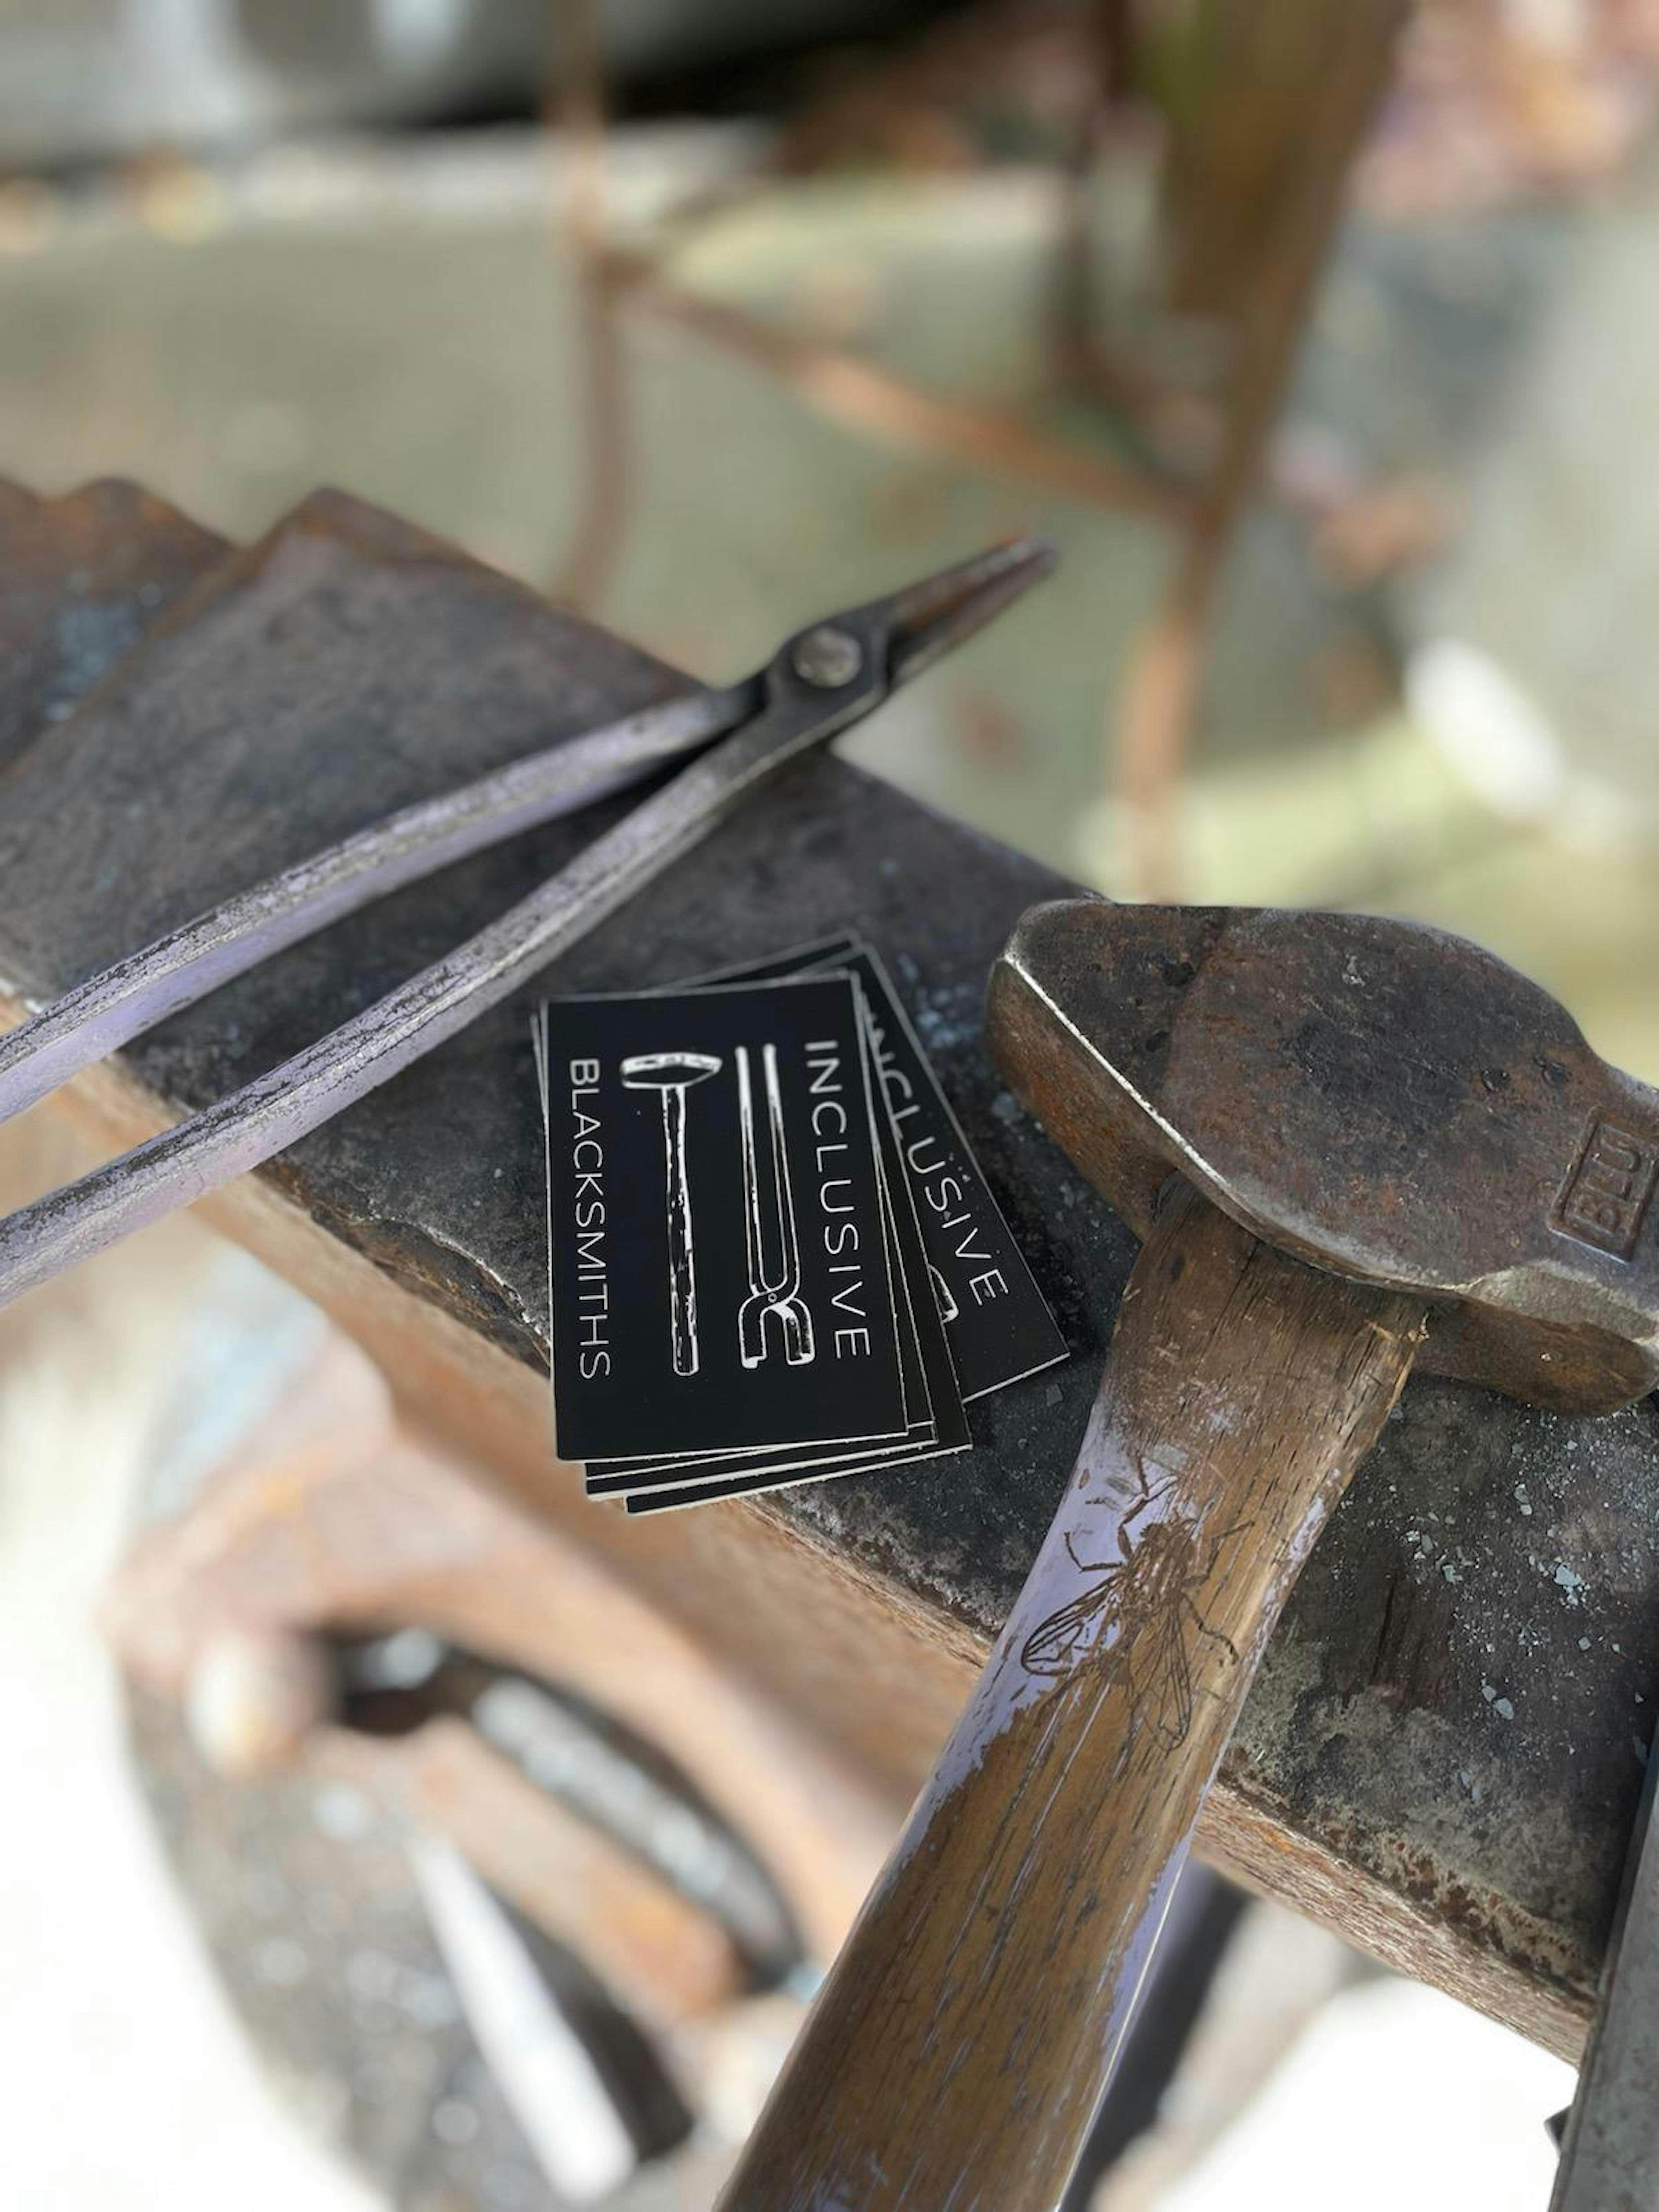 blacksmithing tools resting on an anvil beside a stack of business cards